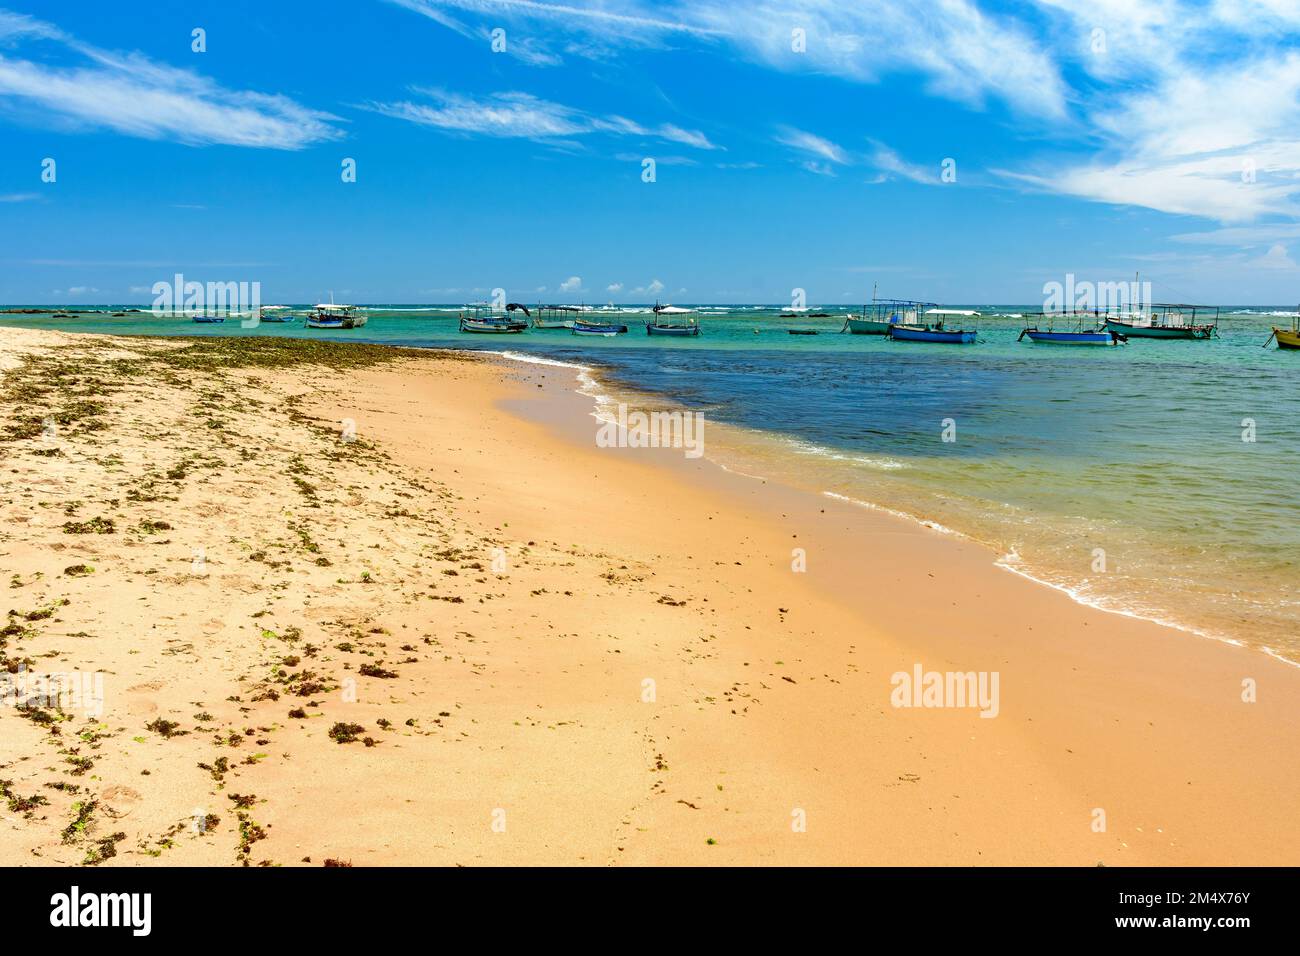 Boats on the transparent waters of Itapua beach in the city of Salvador in Bahia on a sunny day Stock Photo